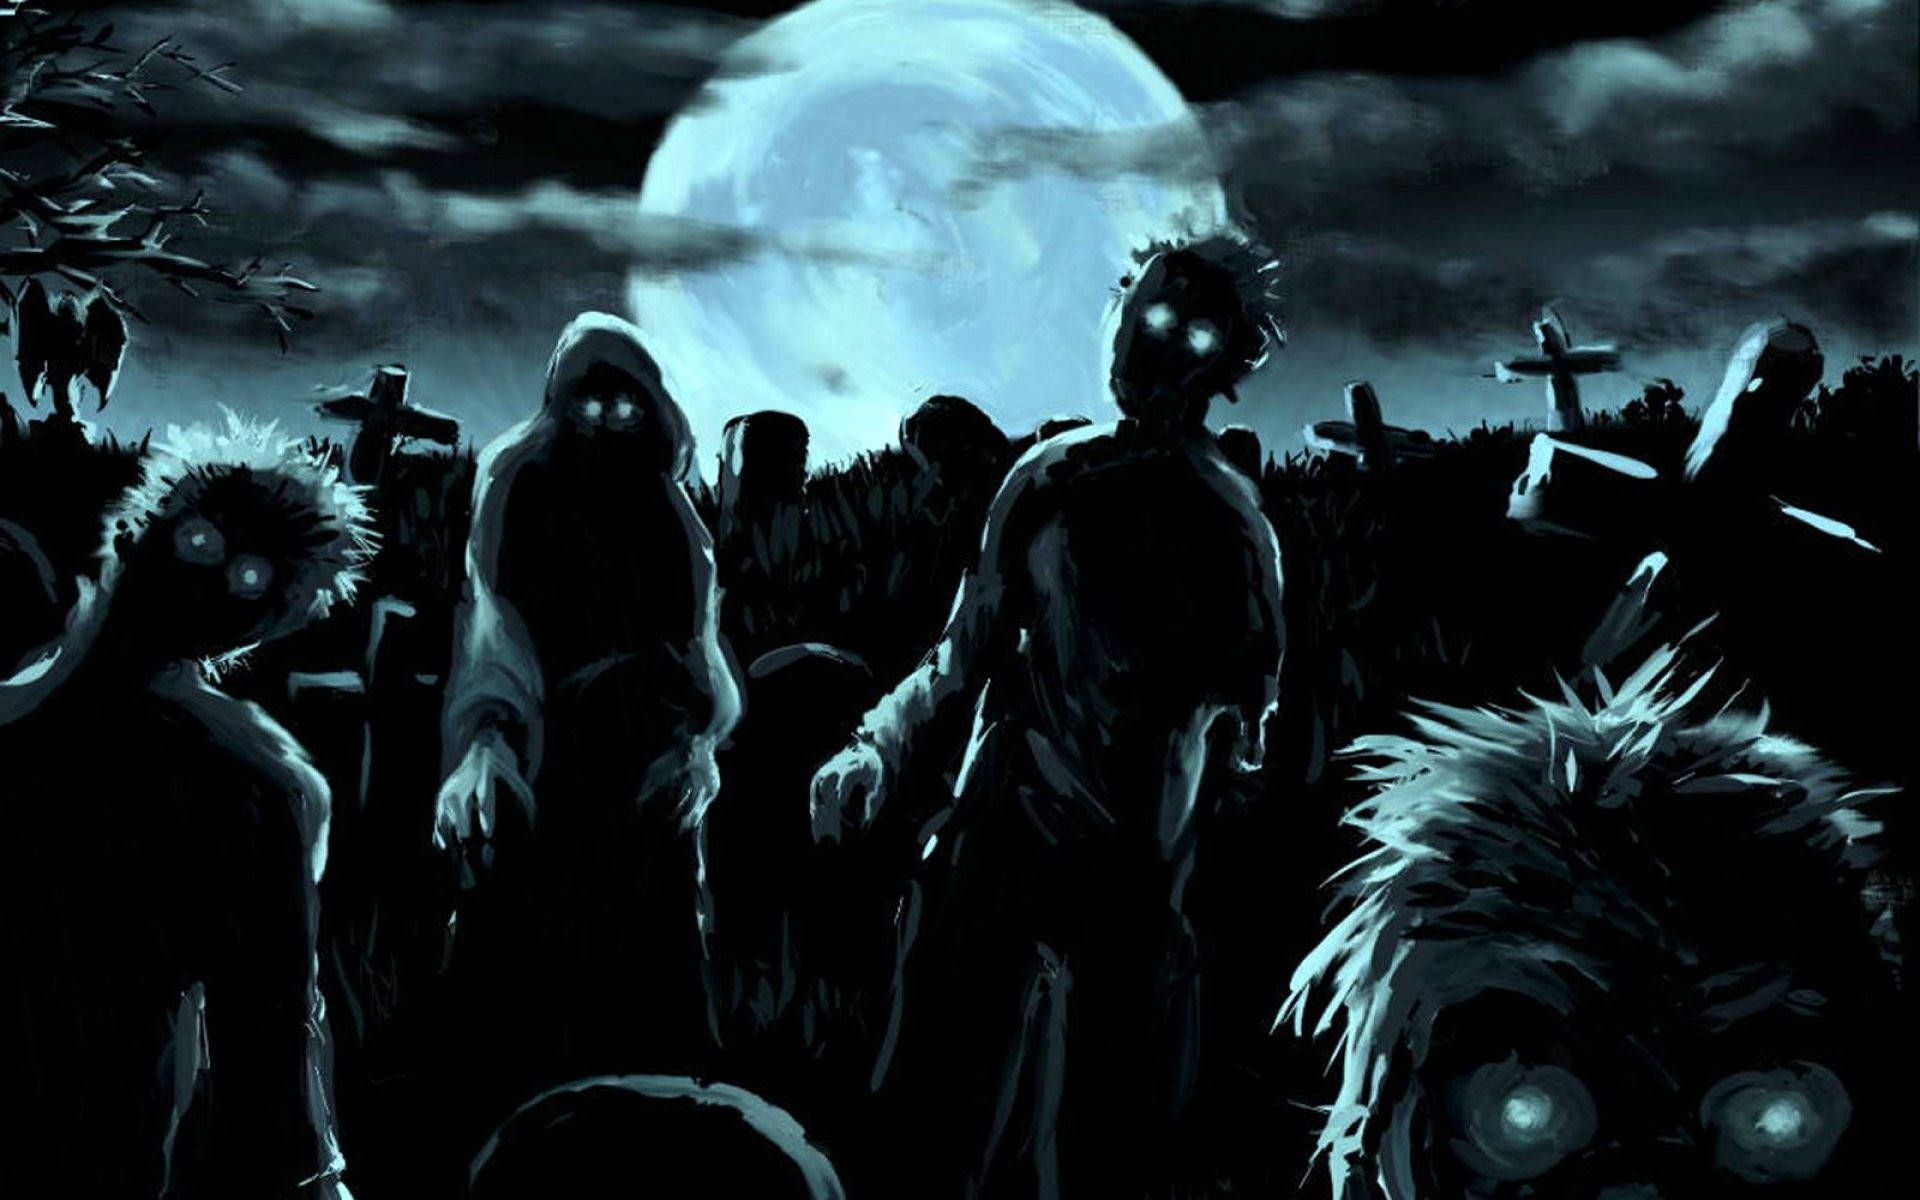 An eerie and mysterious Halloween night. Wallpaper